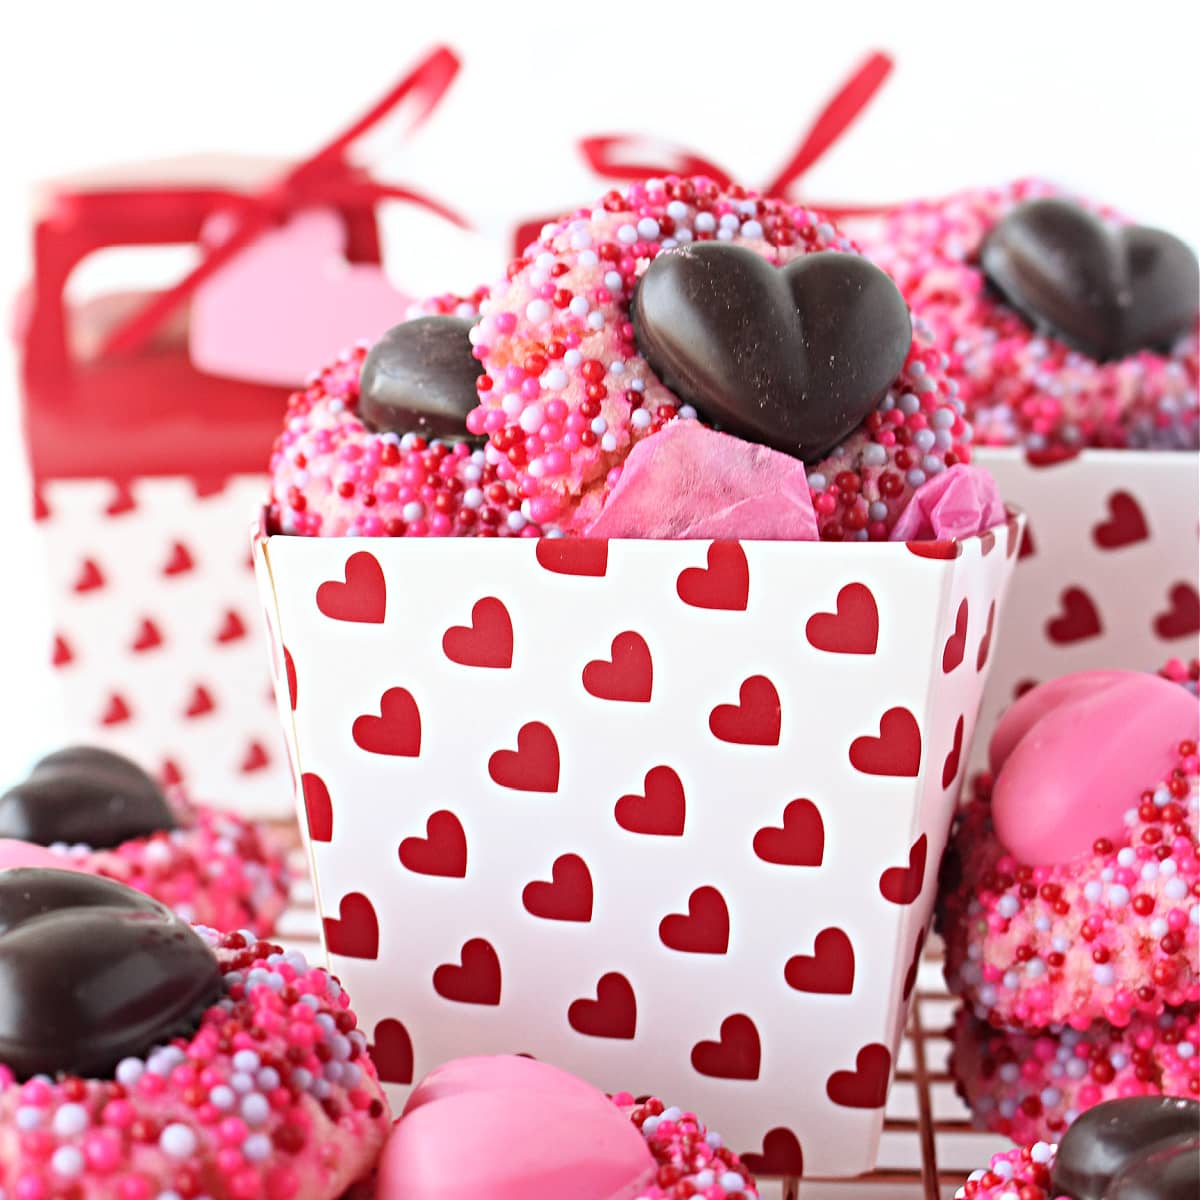 Closeup of a cookie in a gift box decorated with hearts.